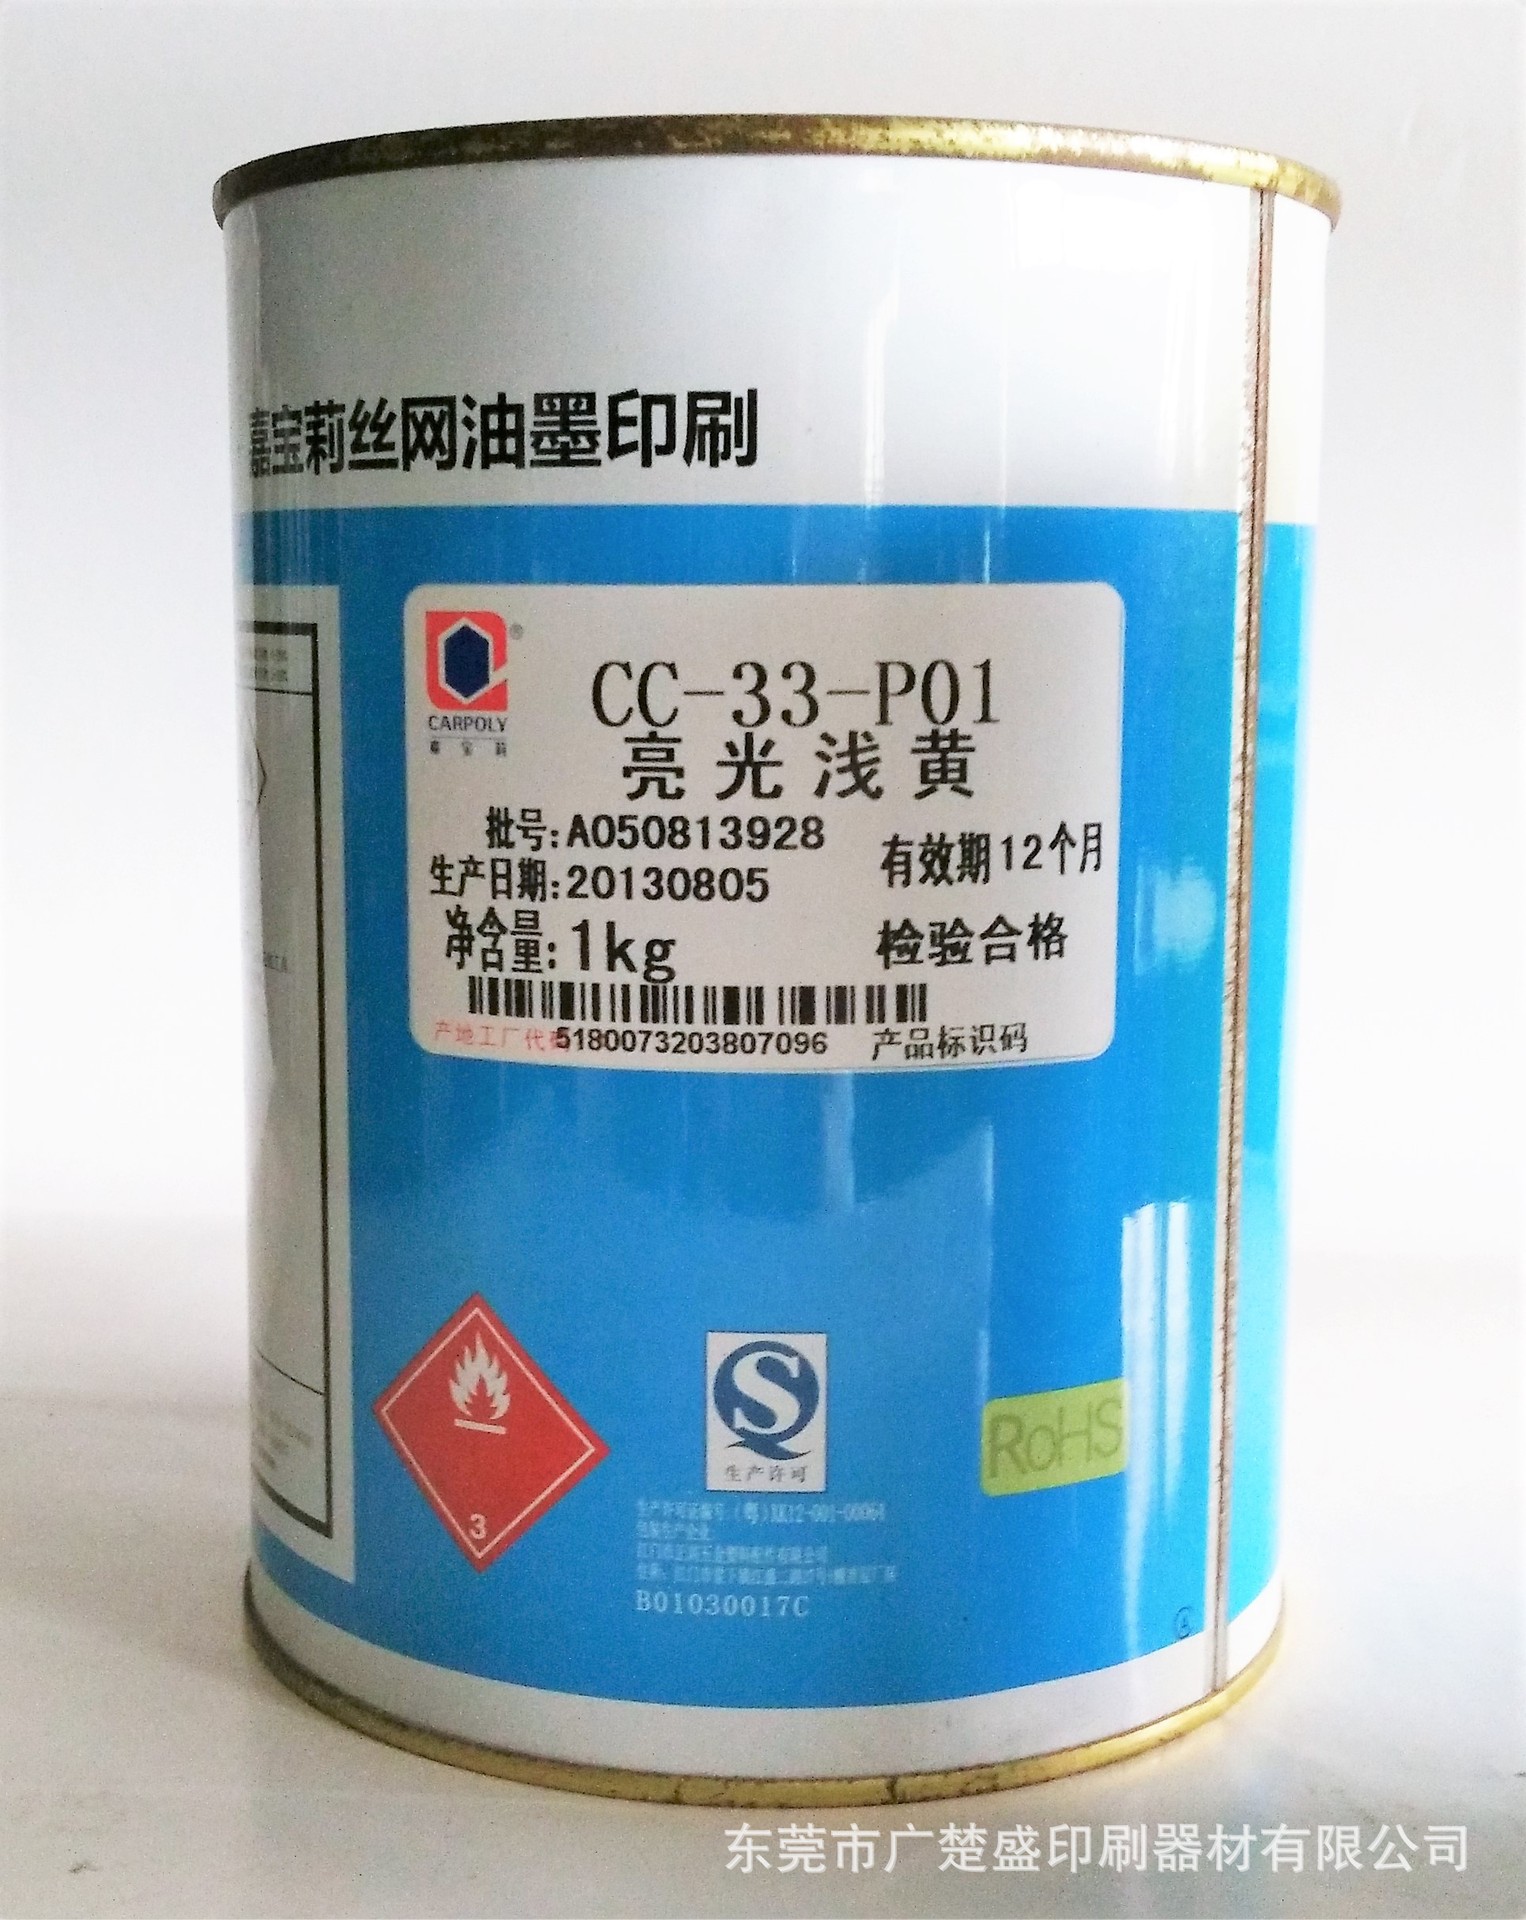 Carpoly ink CC 33 P01 Yellow Component Metal printing printing ink Screen Printing Inks